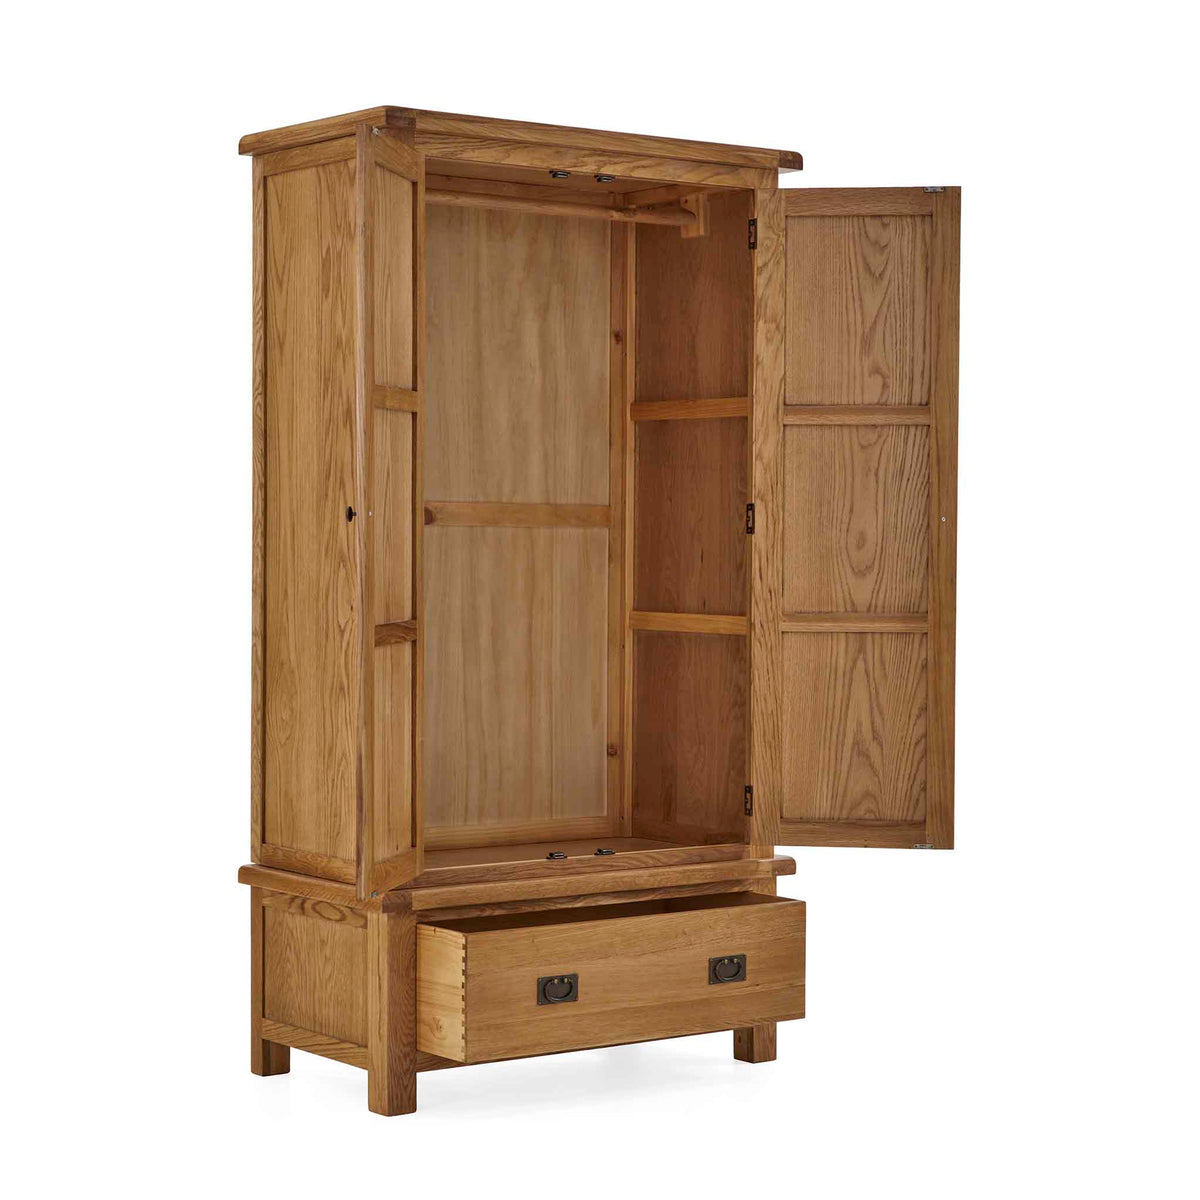 Zelah Oak Double Wardrobe with Drawer - Side view with wardrobe and drawer open